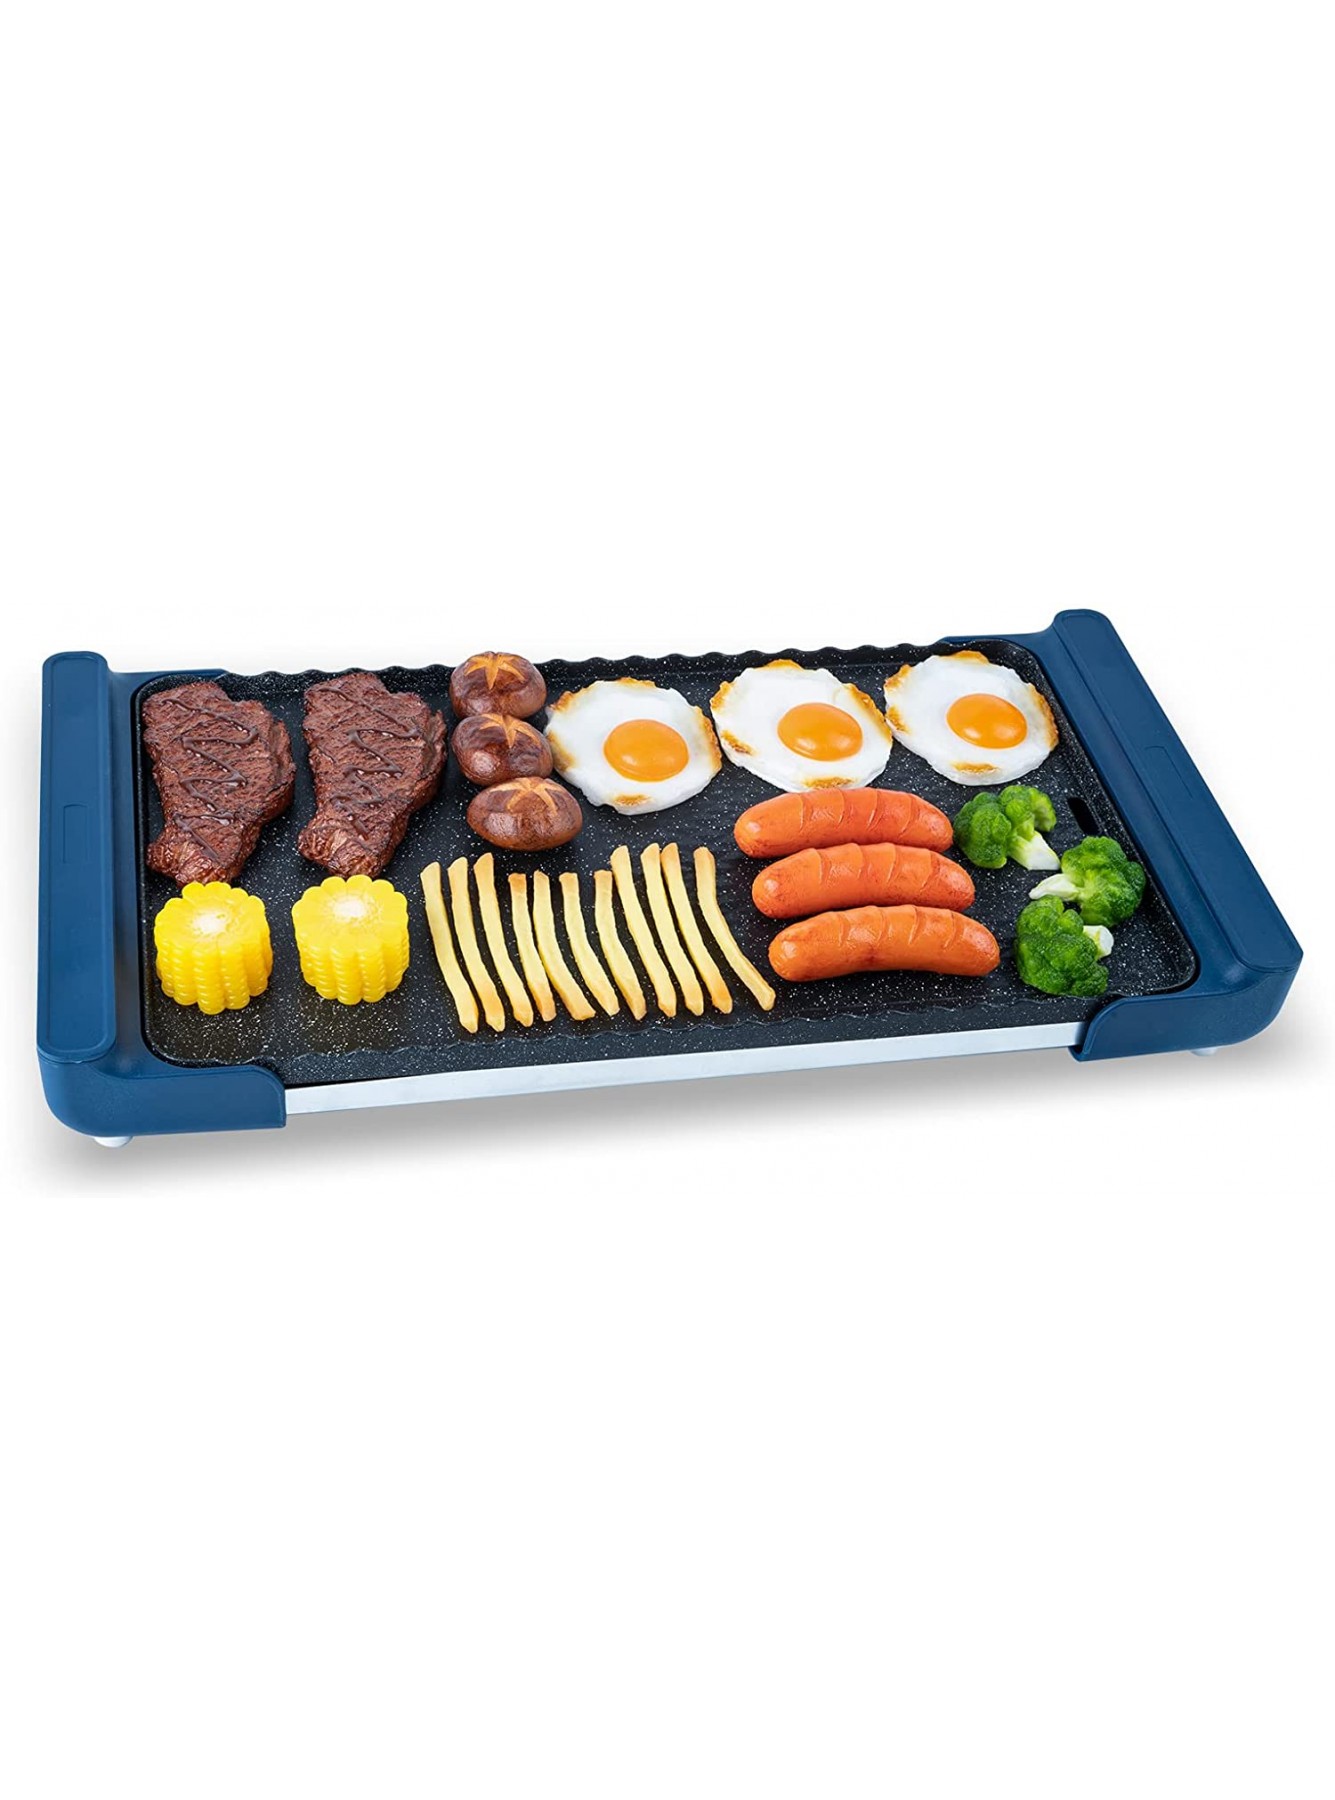 Kerilyn Pancake Electric Indoor Kitchen Griddle 21 inch Nonstick Flat Cast Iron Grilling Plate 1600 Watt With Temperature Control Family Sized Griddle For Pancakes Burgers Breakfast Lunch Navy B09WV2HV45